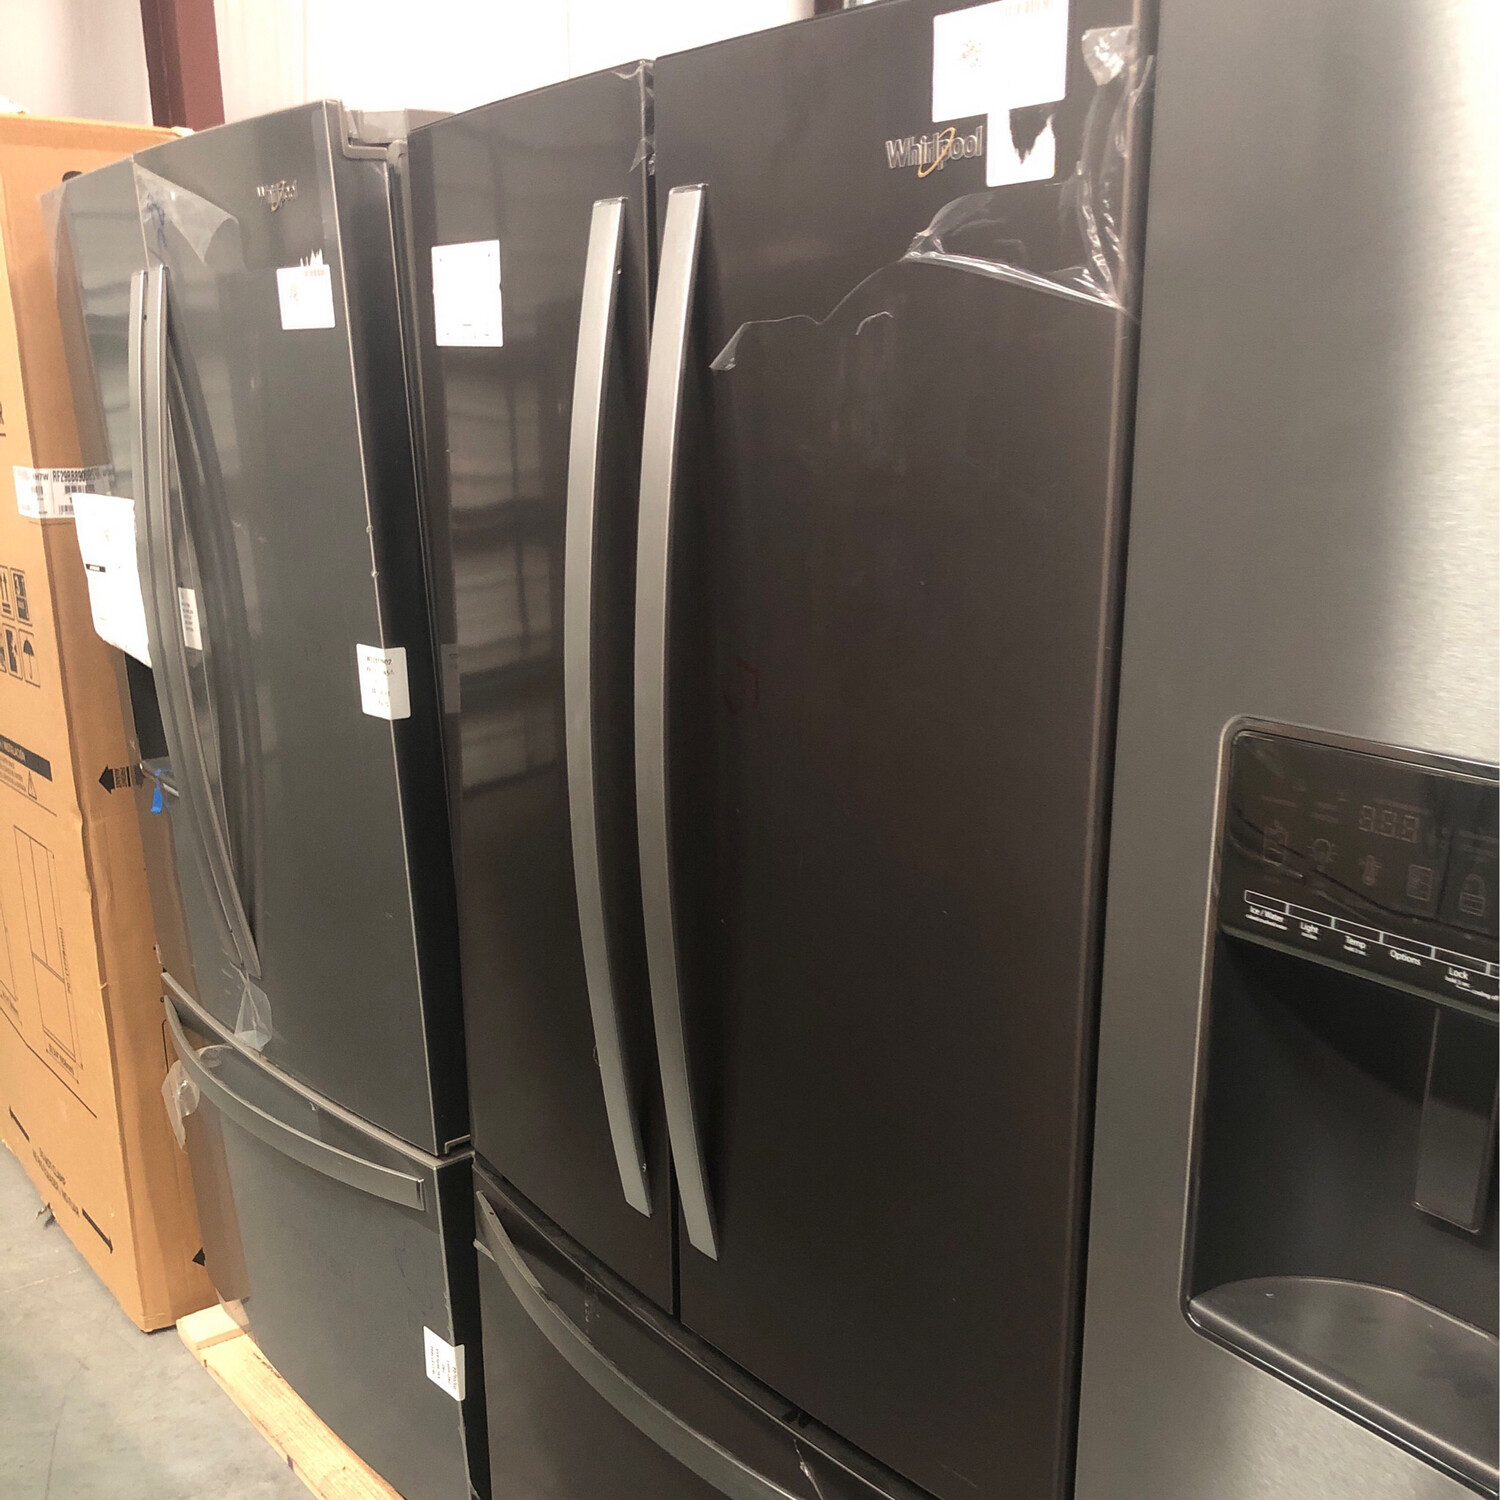 Whirlpool French Door 25.2 cu ft Refrigerator Stainless Steel Model WRF535SWHV Open Box S&amp;D